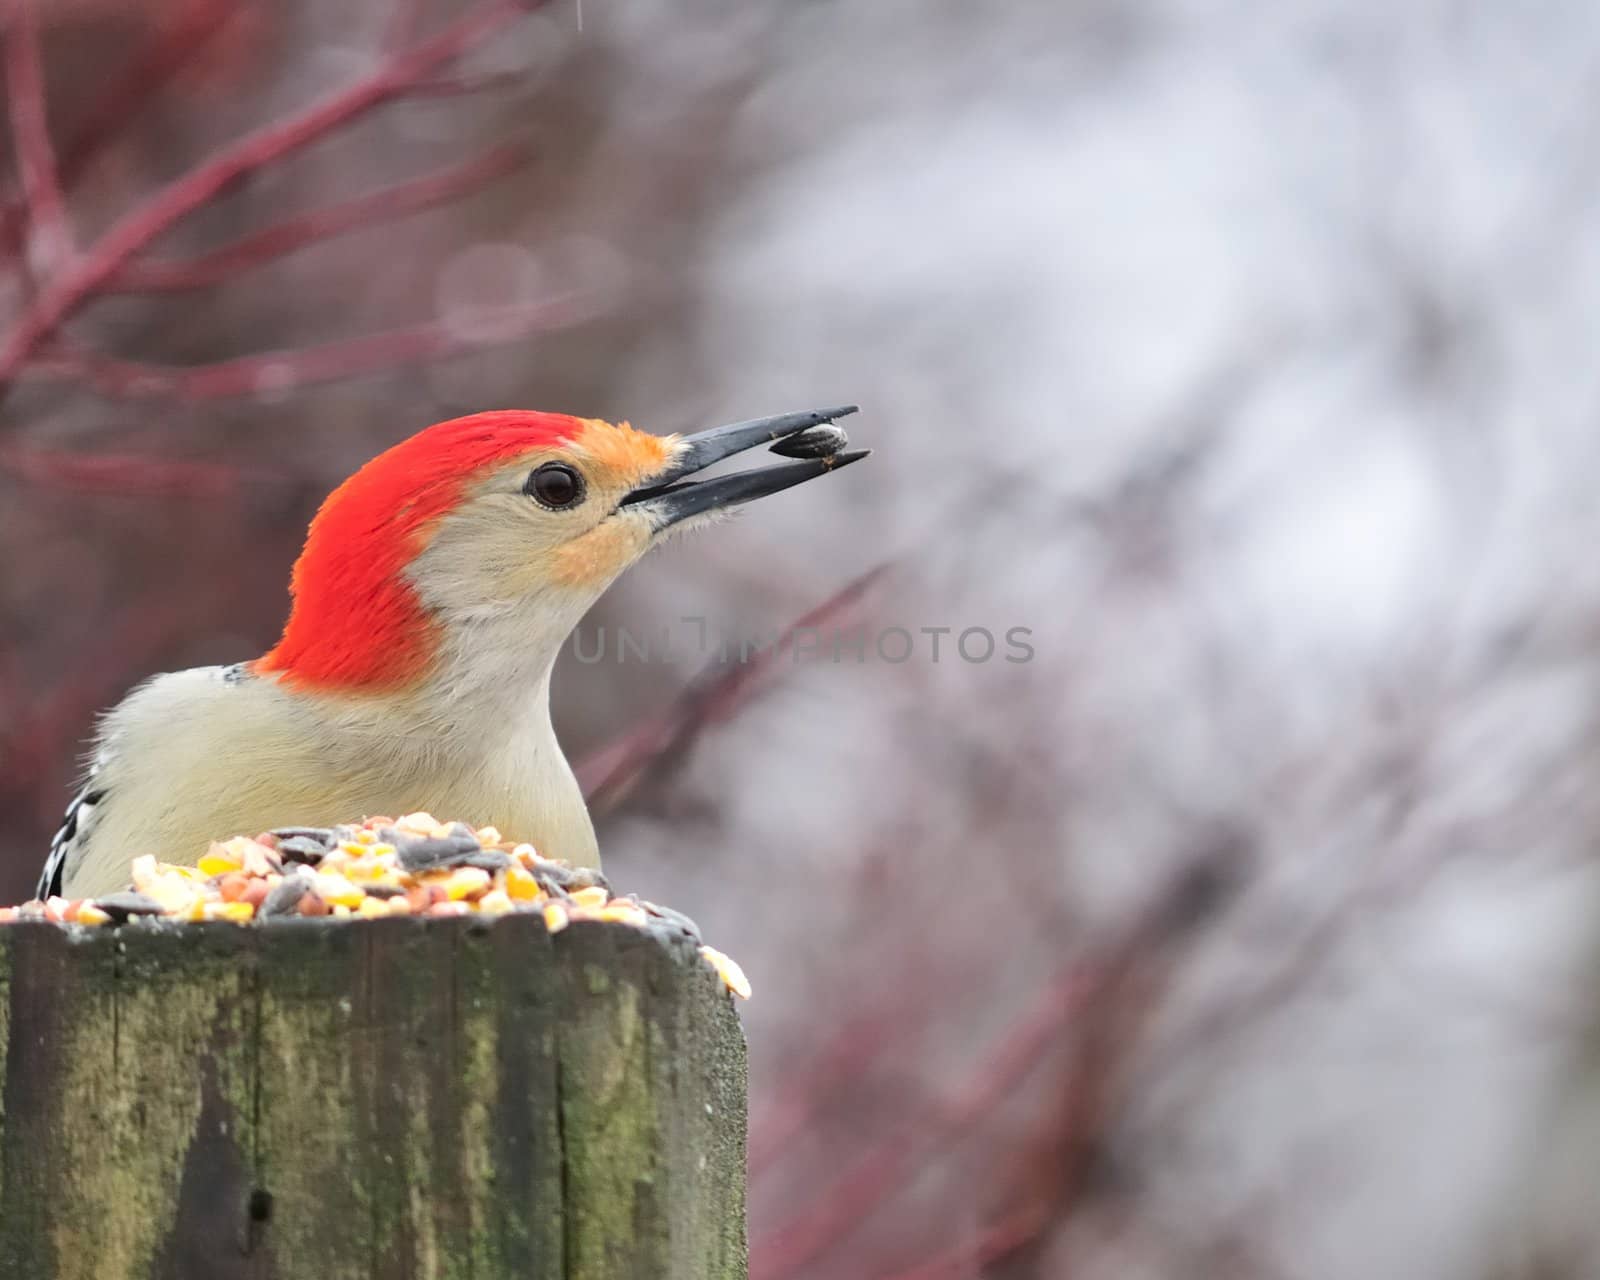 Male red-bellied woodpecker eating bird seed on a wooden post.